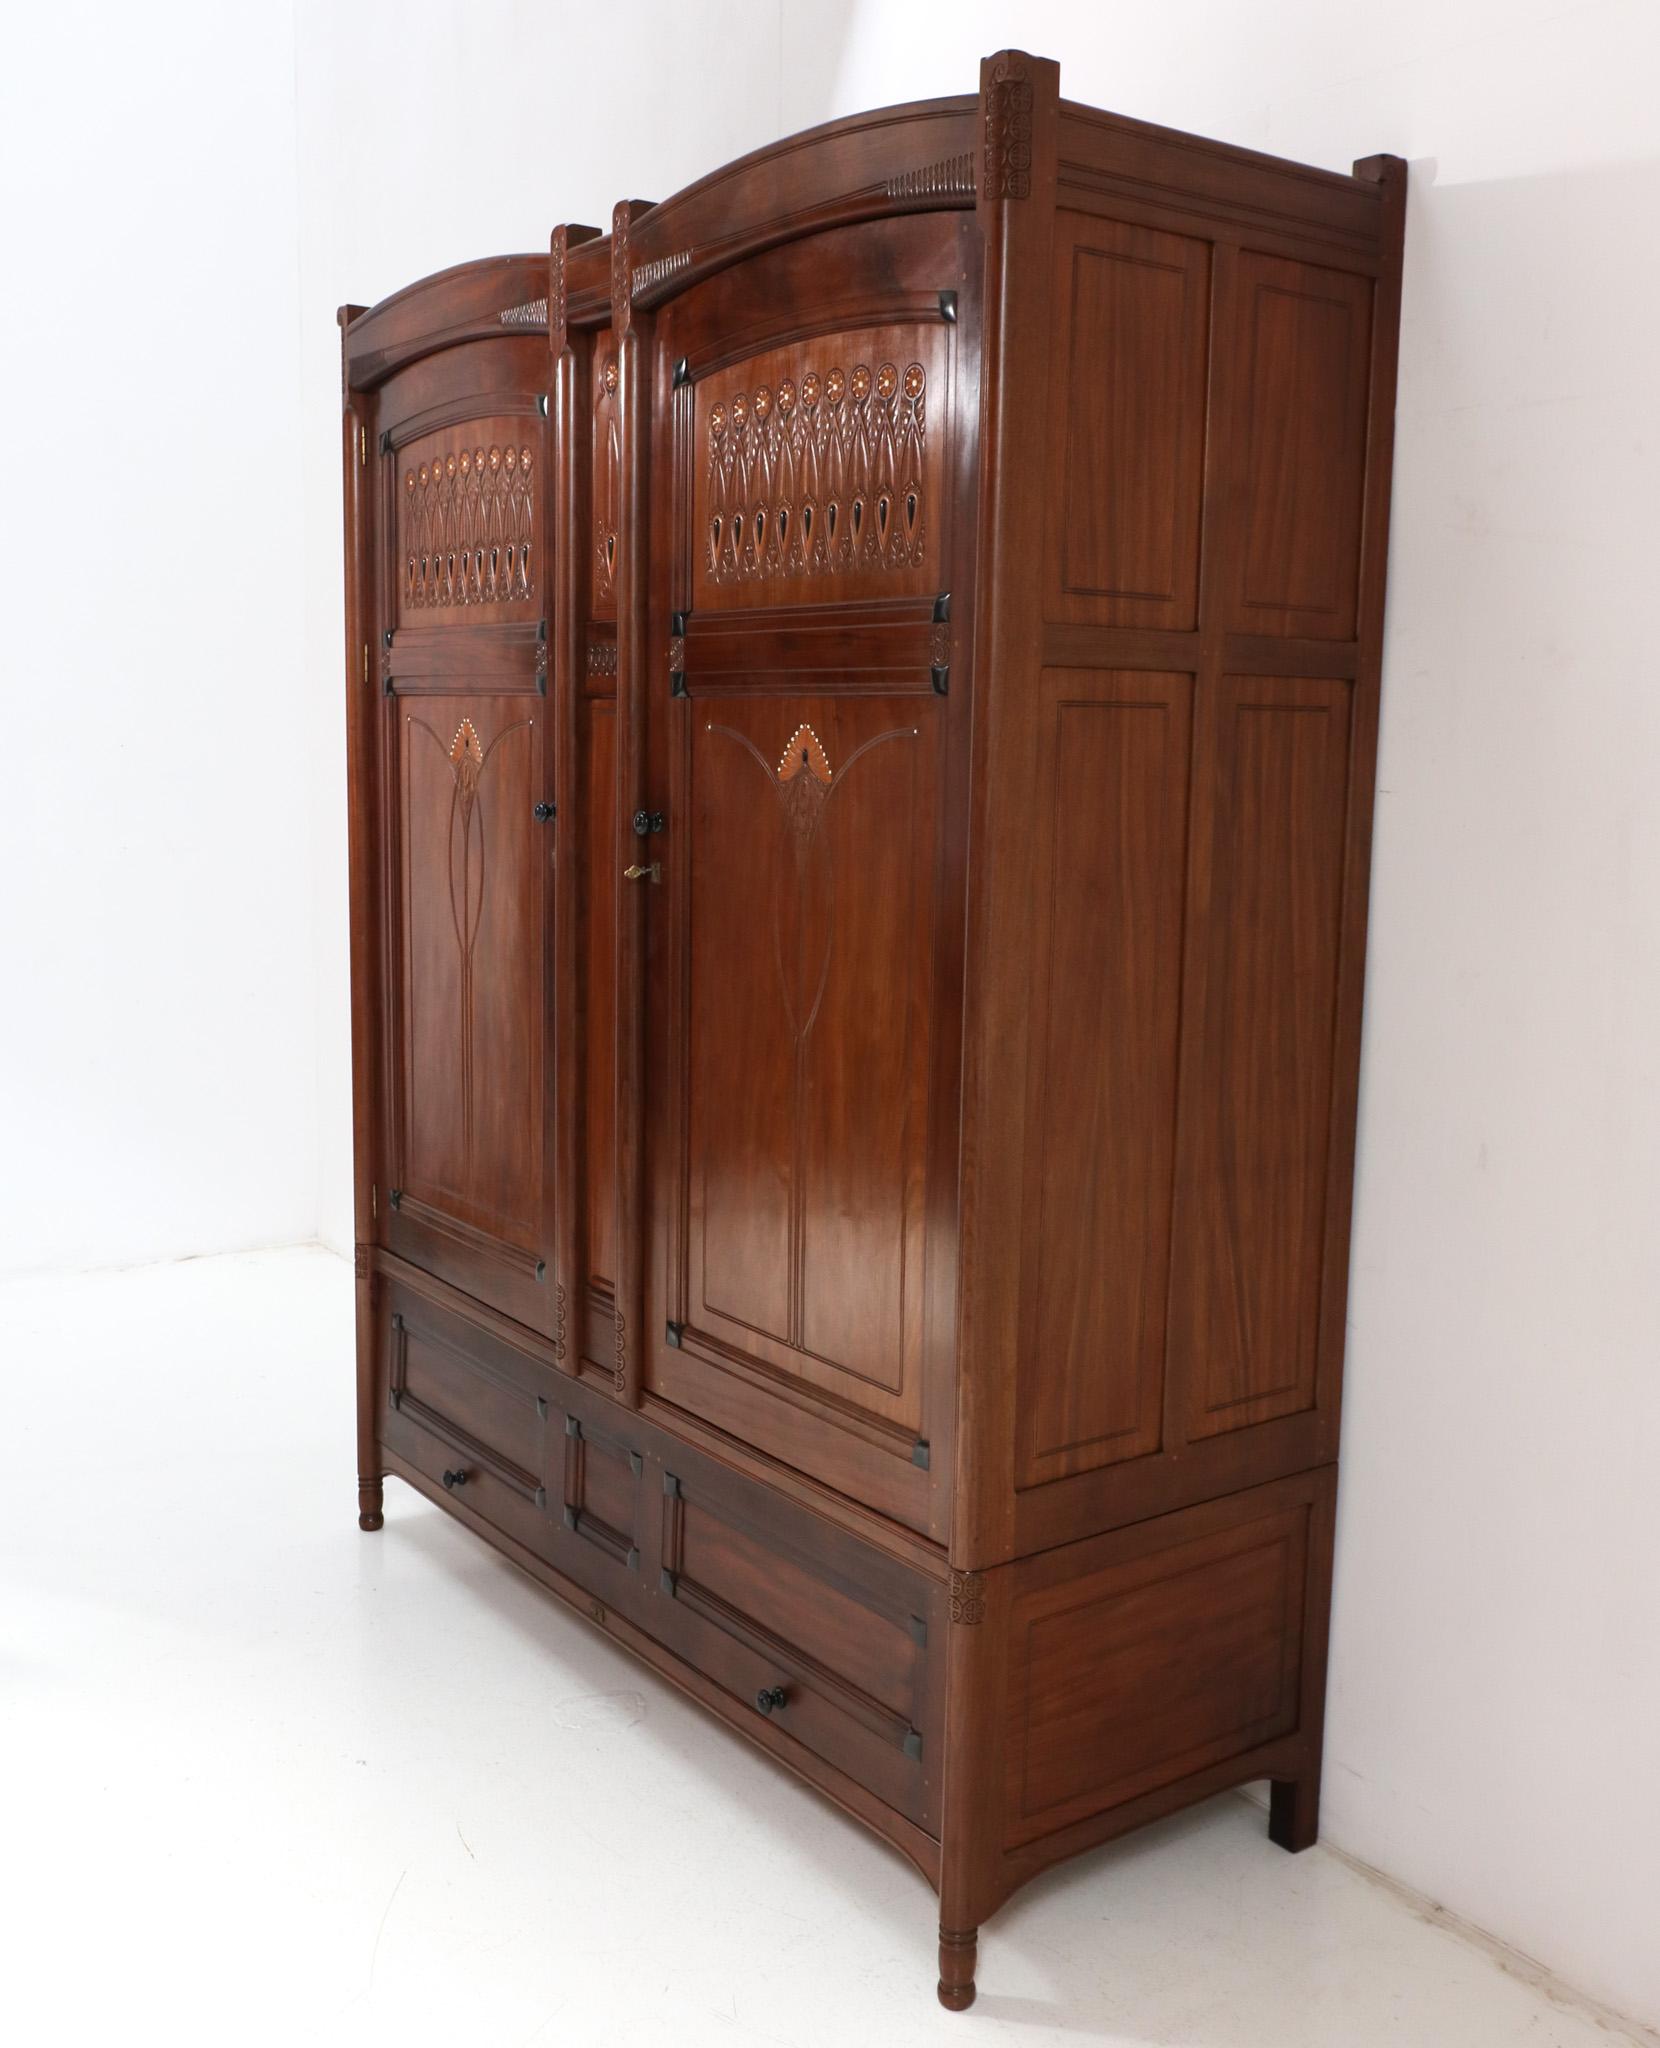 Early 20th Century  Arts & Crafts Armoire or Wardrobe by Jac. van den Bosch for 't Binnenhuis, 1910 For Sale